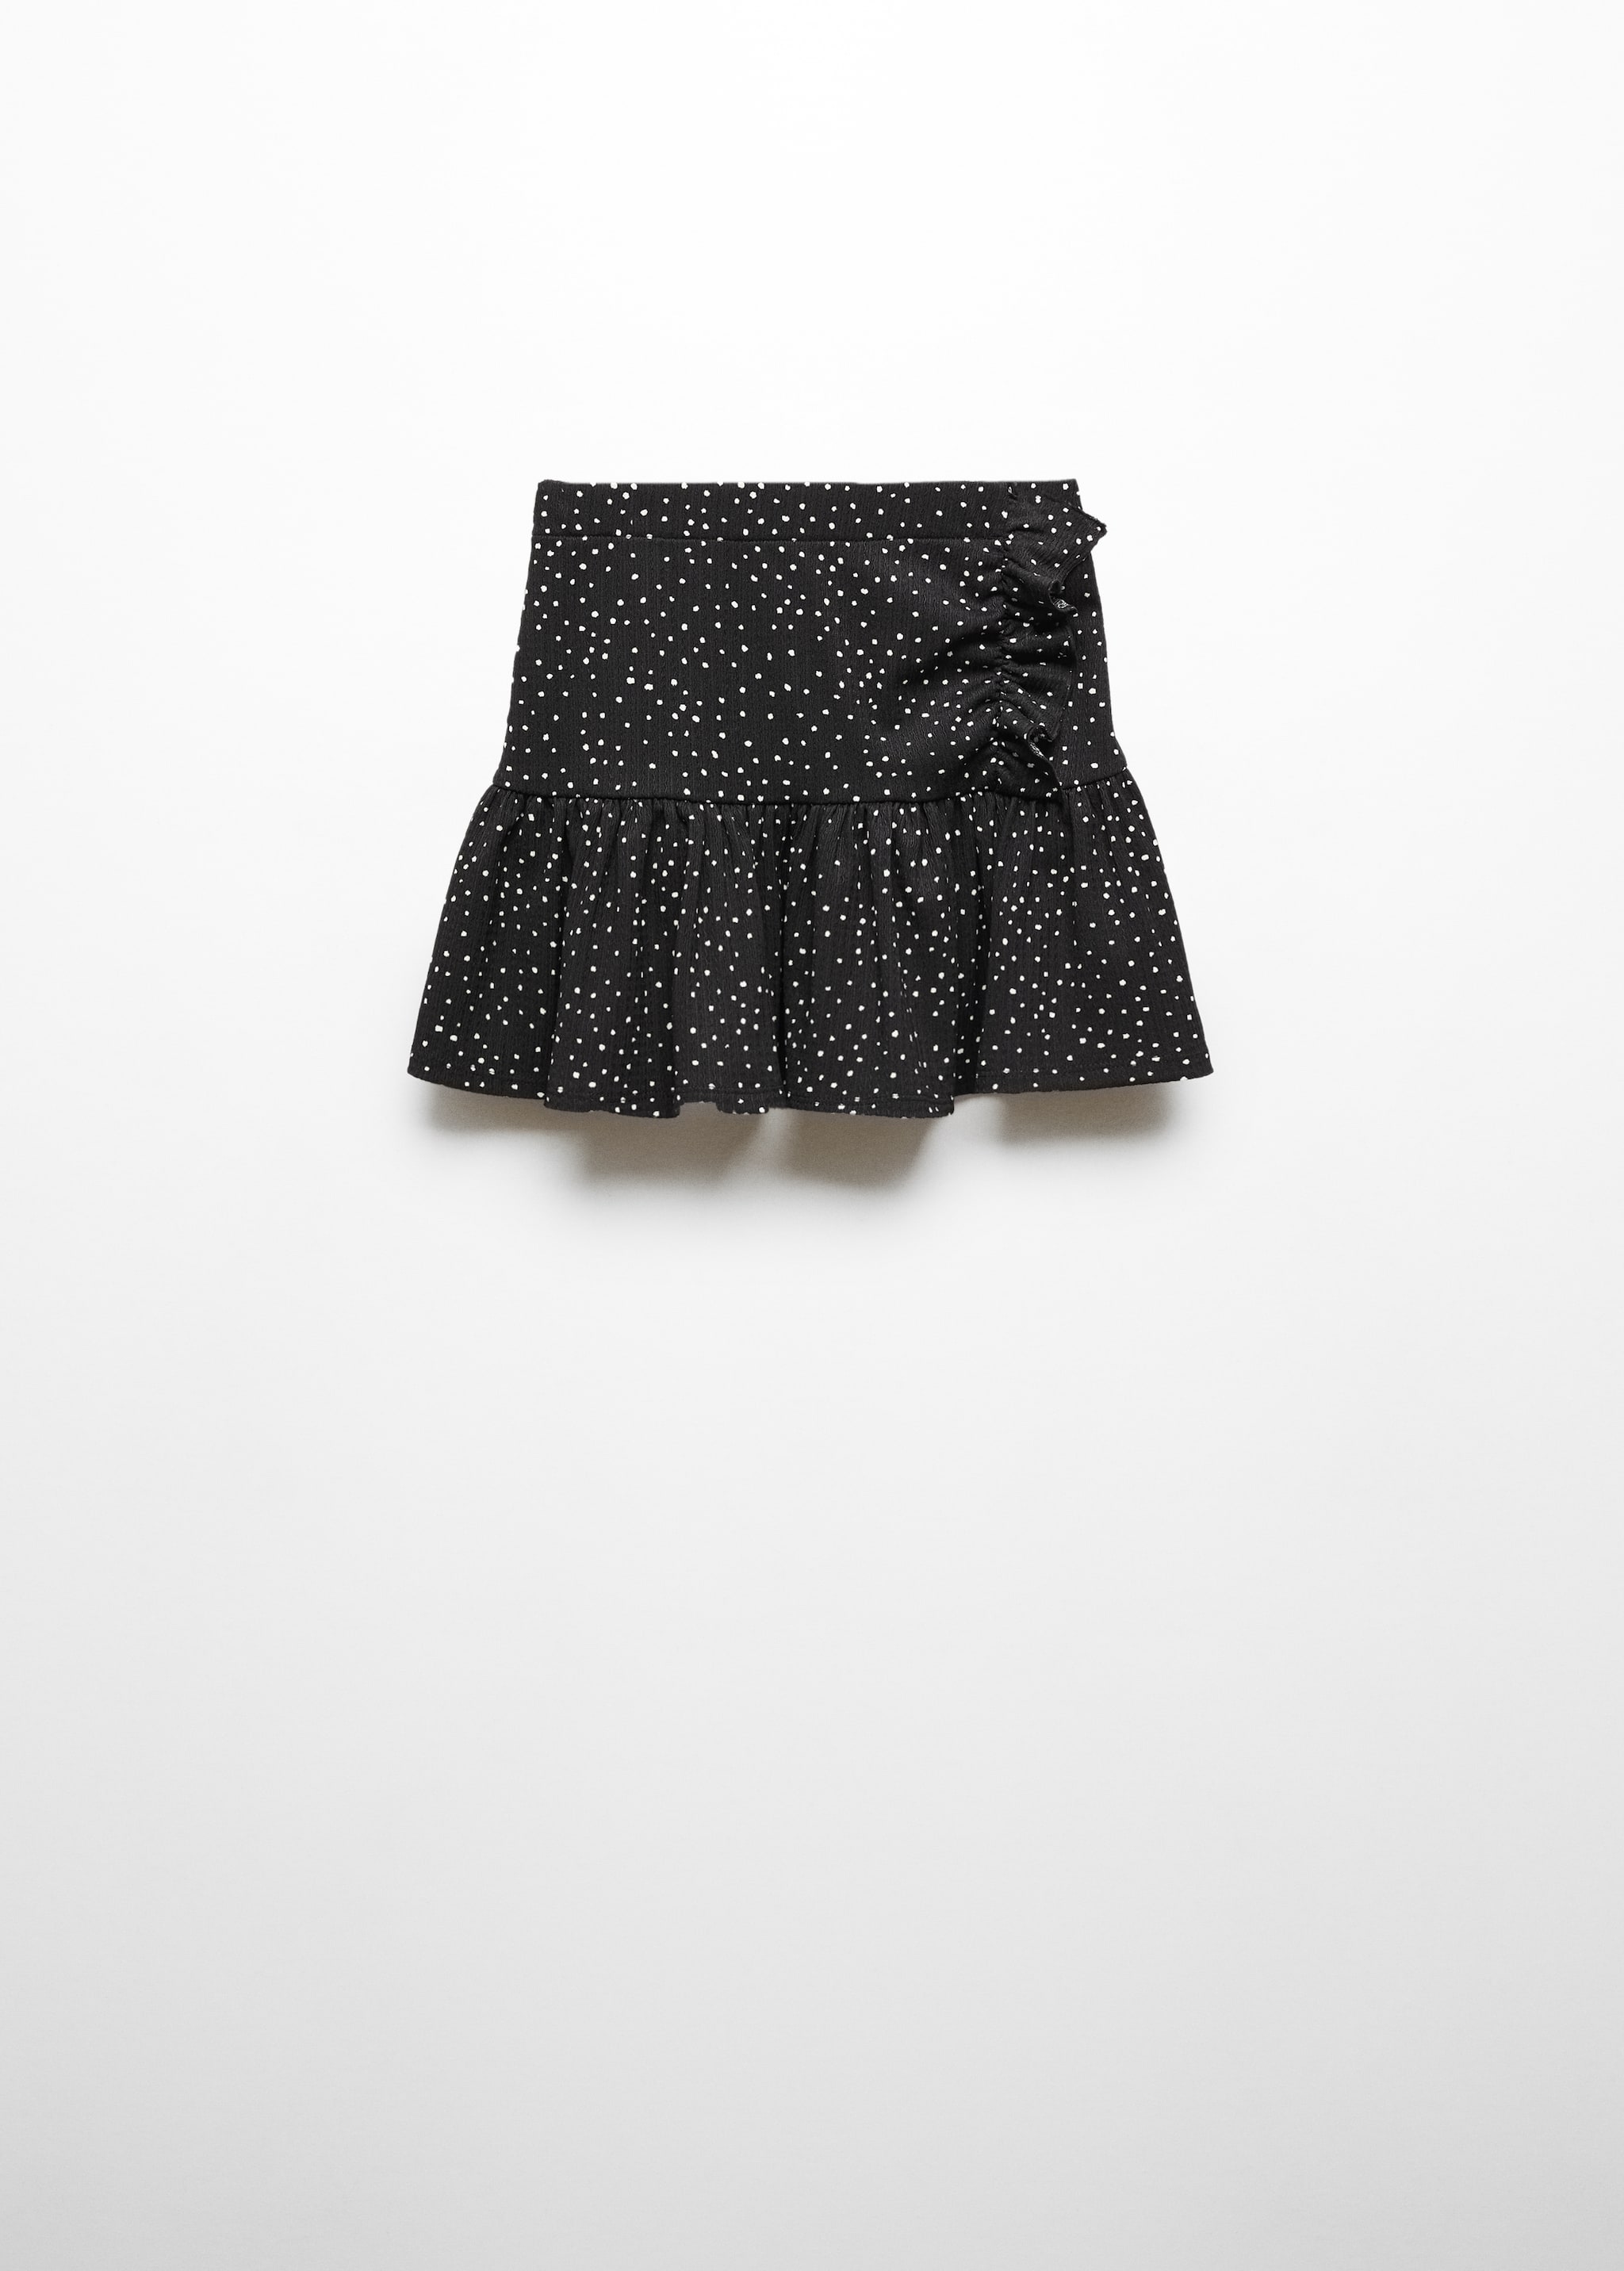 Ruffled polka dot skirt - Article without model